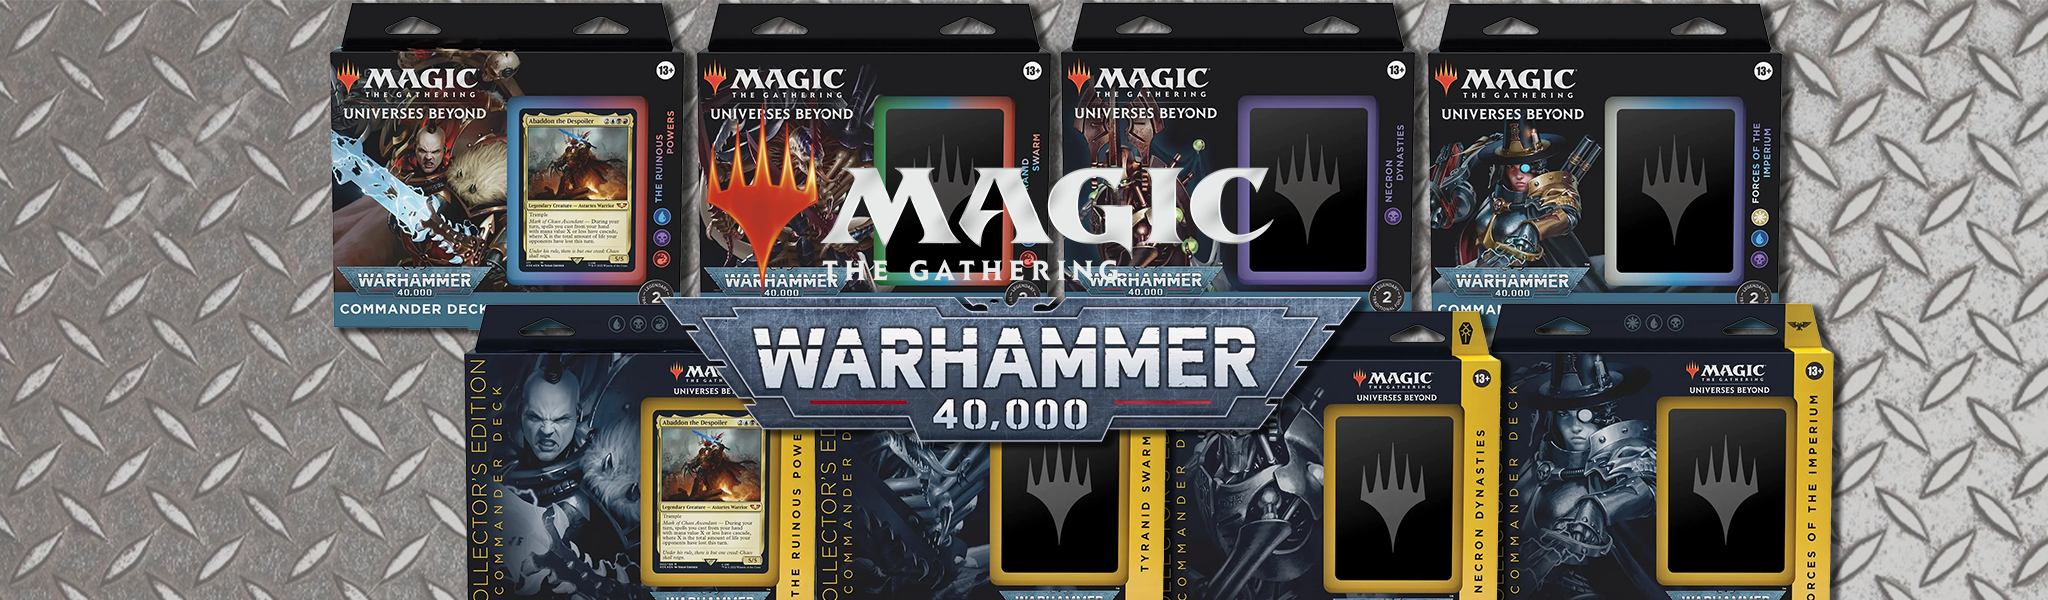 Commander Decks, Collector's Edition—Universes Beyond: Warhammer 40,000— Magic the Gathering - Board Game Barrister